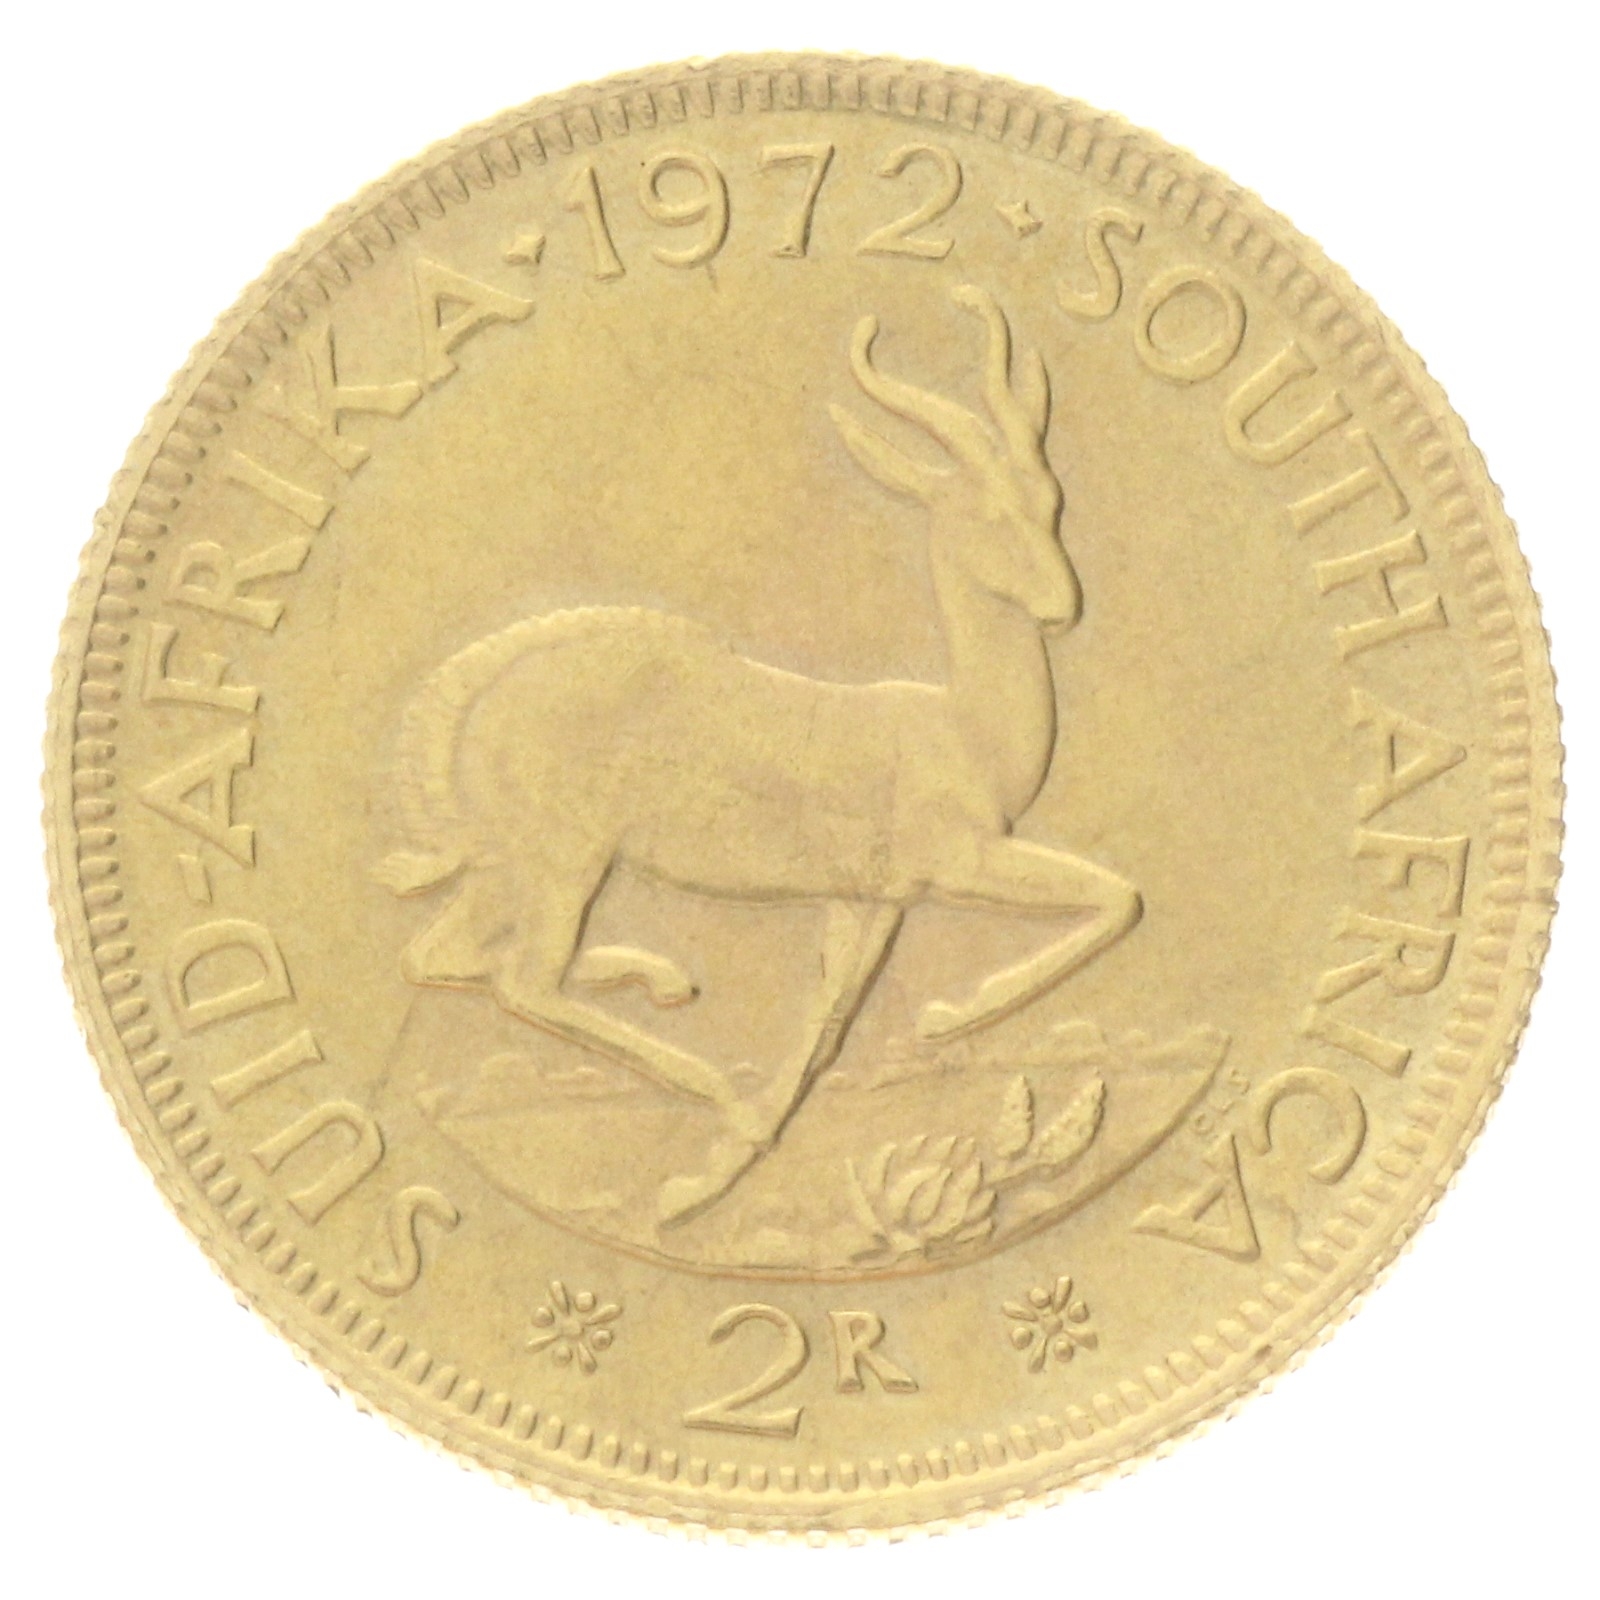 South Africa - 2 rand - 1972